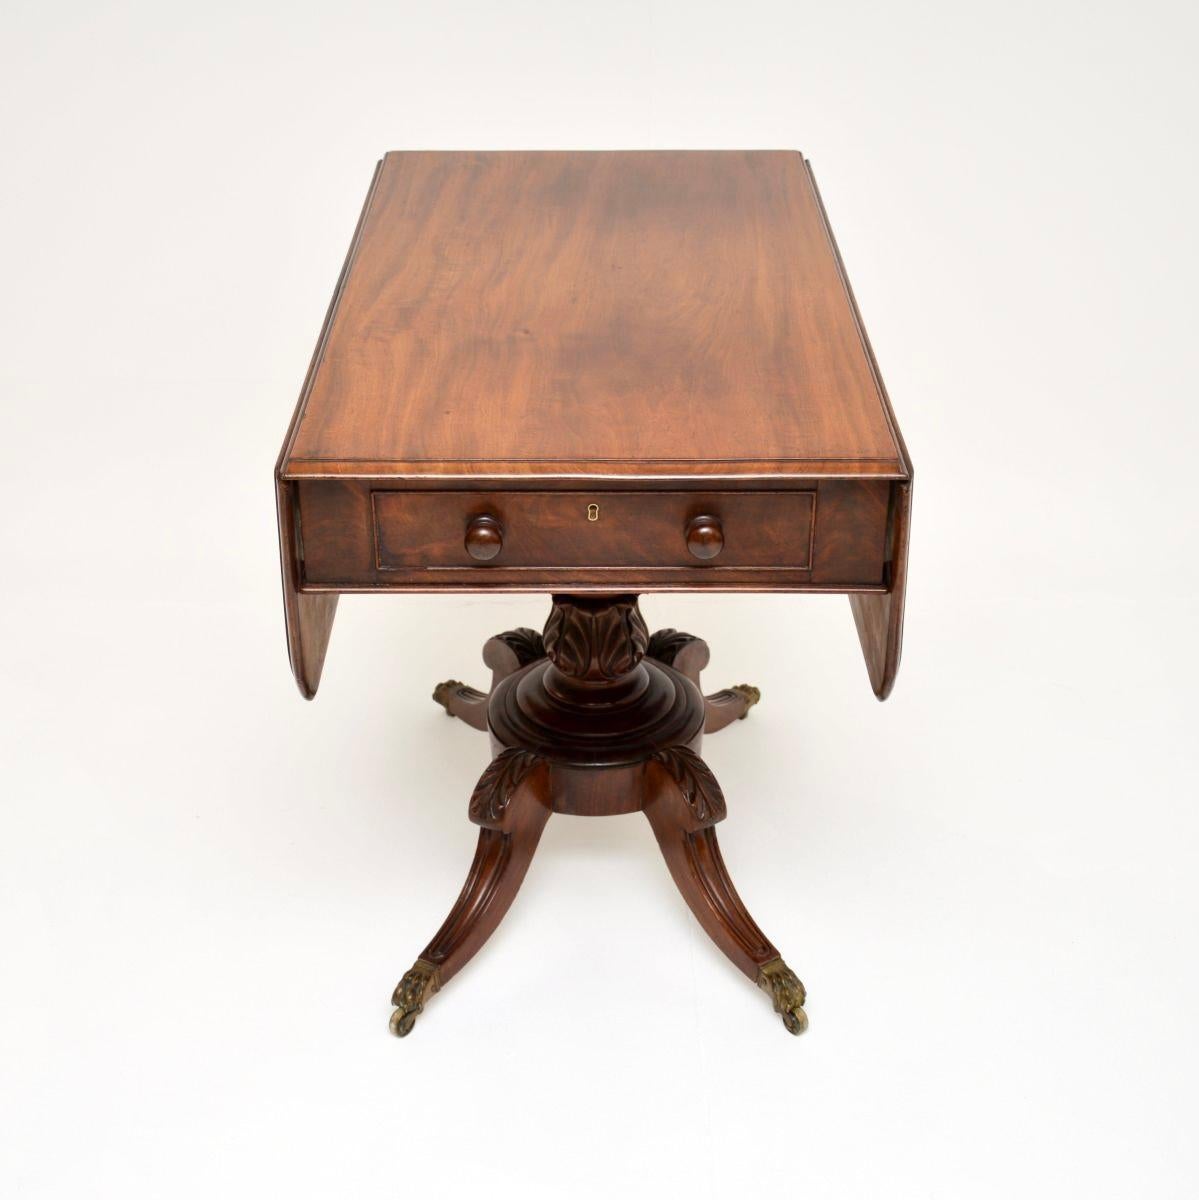 A fantastic original antique Regency drop leaf table. This was made in England, we would date it from around the 1820-1830 period.

It is of superb quality and is a great size. The drop down ends lift up and each is supported by two hinged pull out